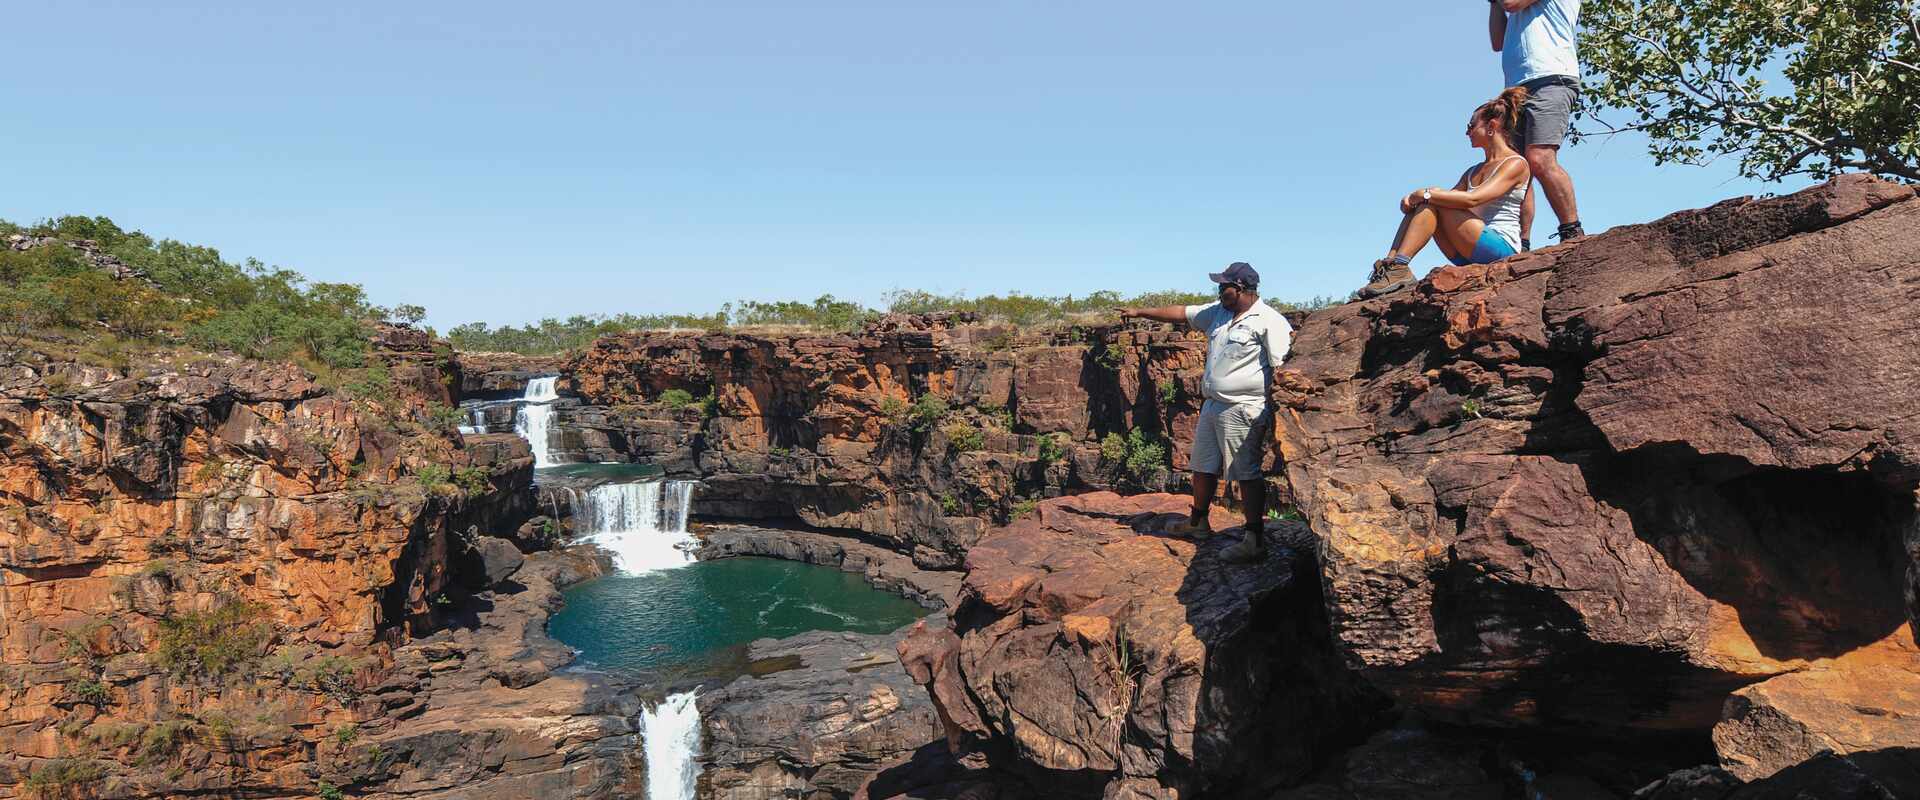 View of two passengers looking over the falls with a guide, Western Australia